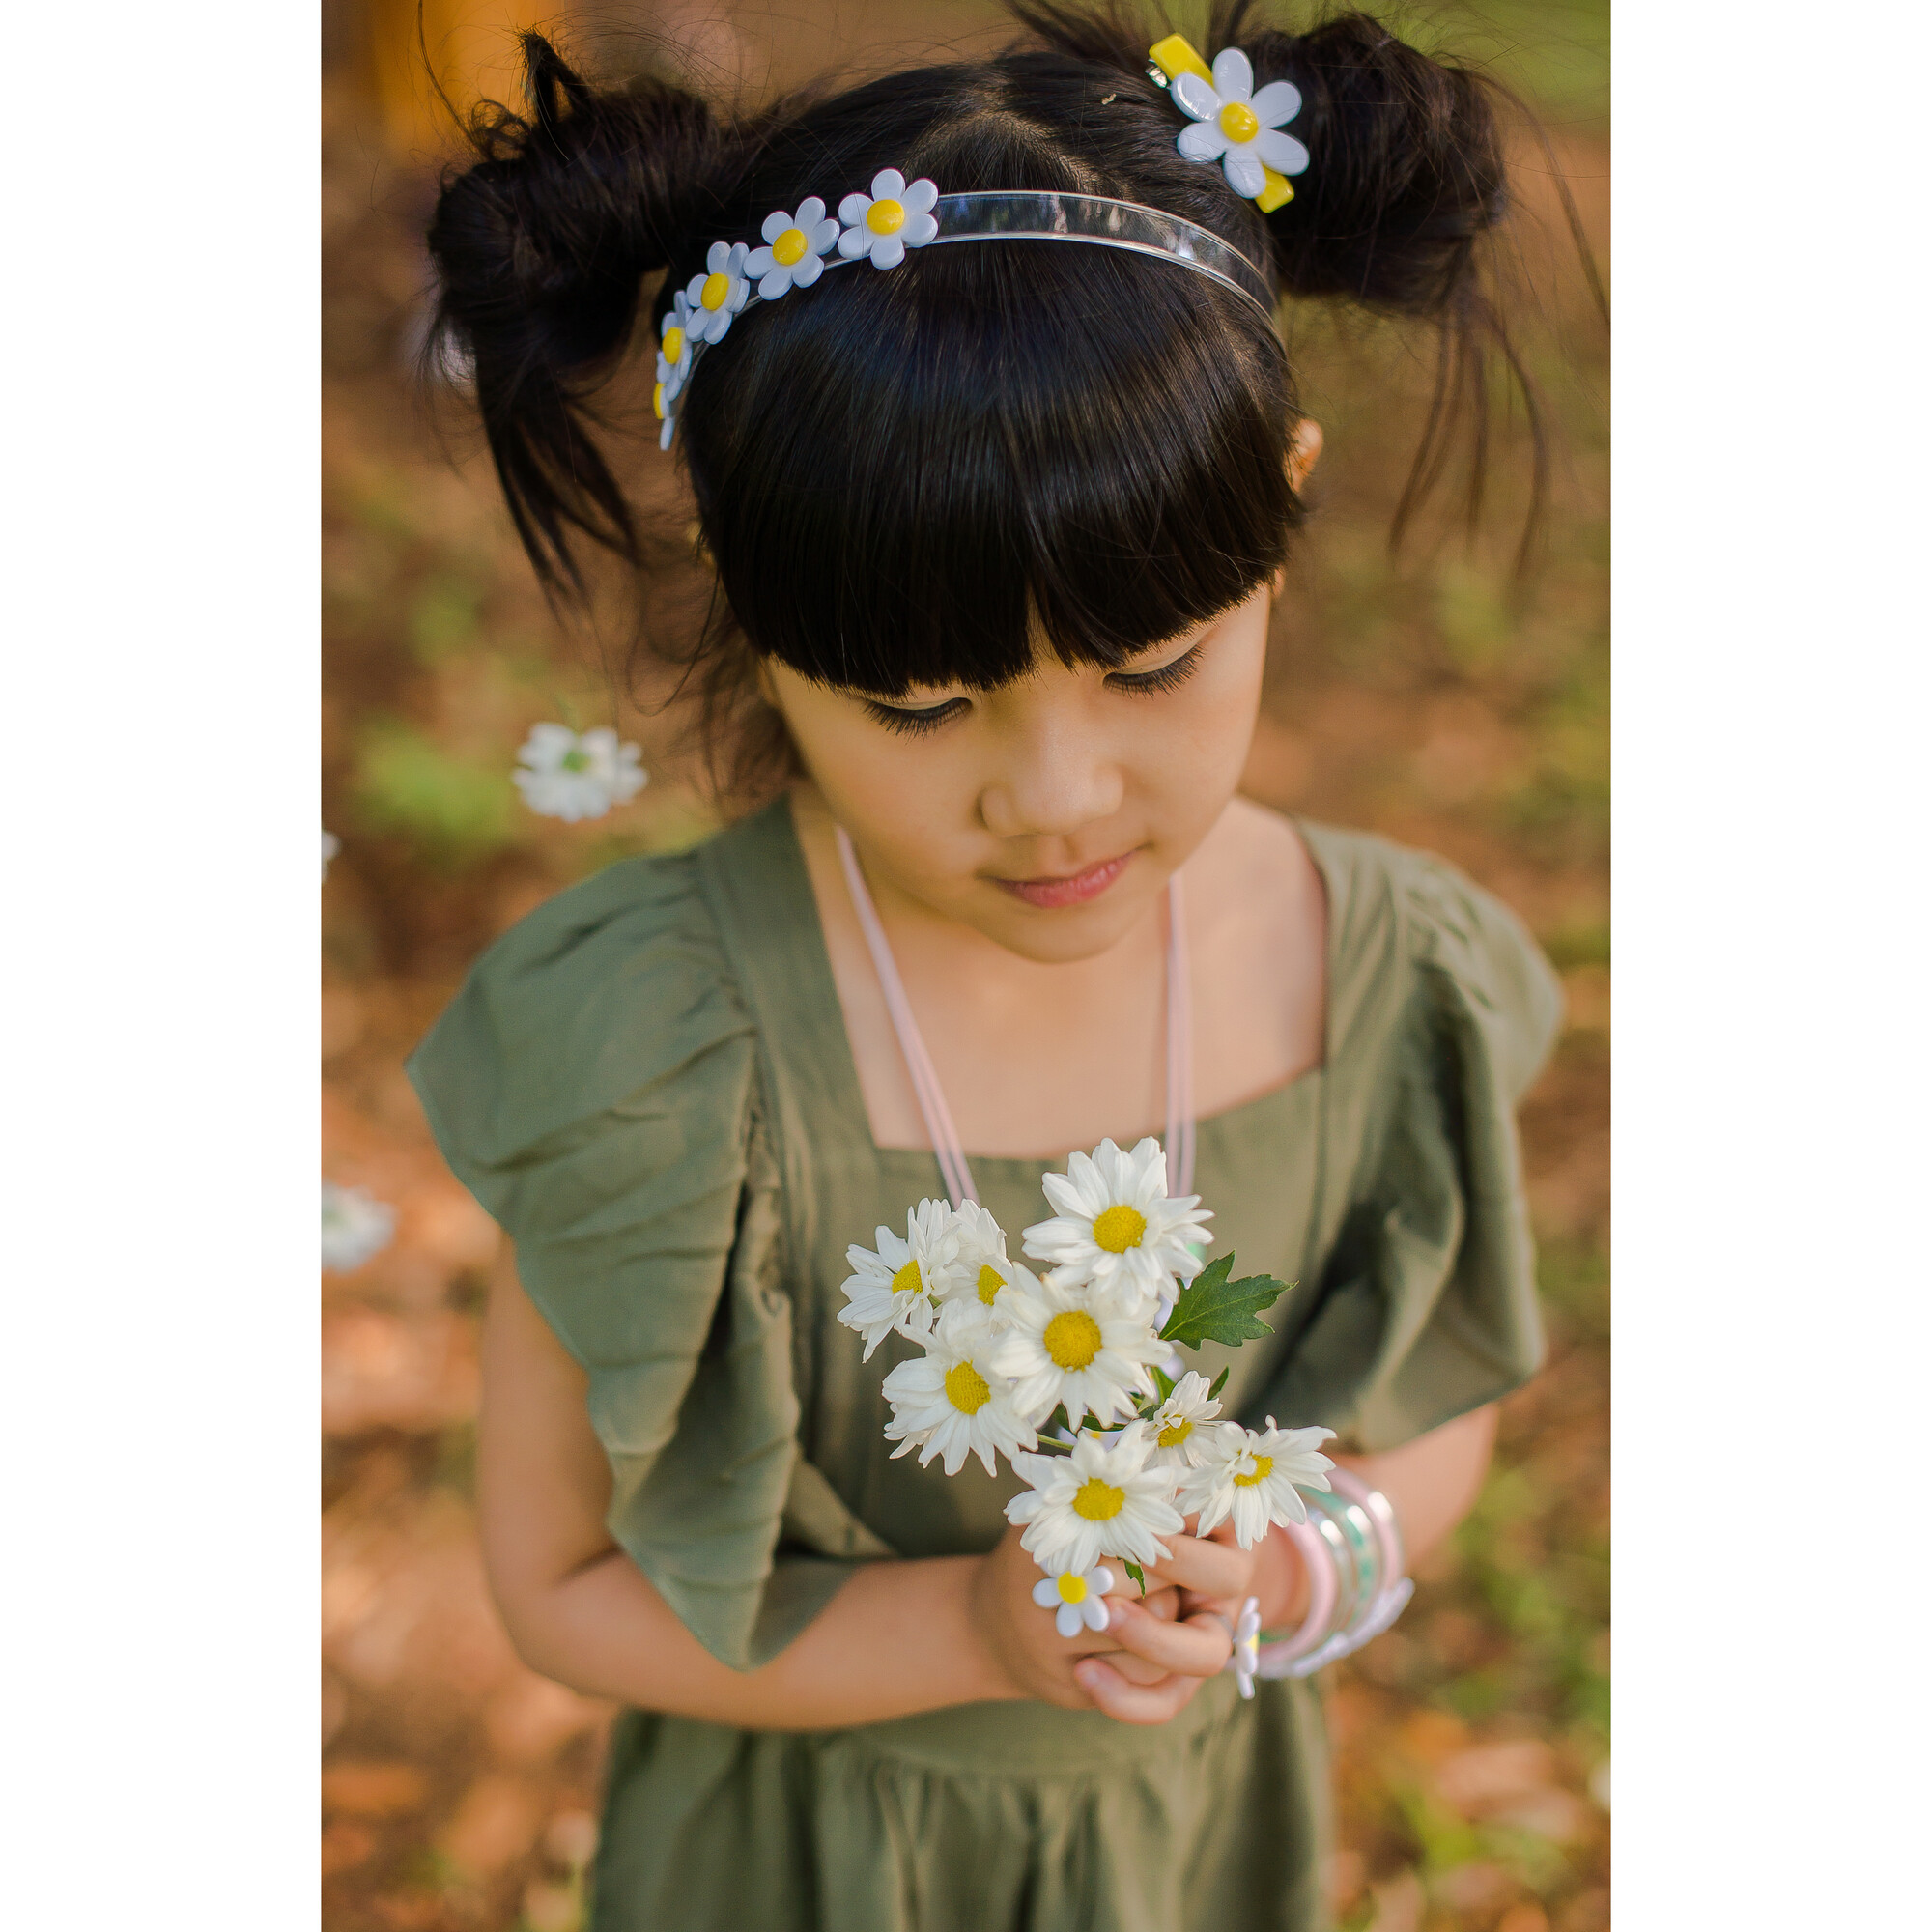 Lilies & Roses Centipede Hearts Candy Headband for Girls